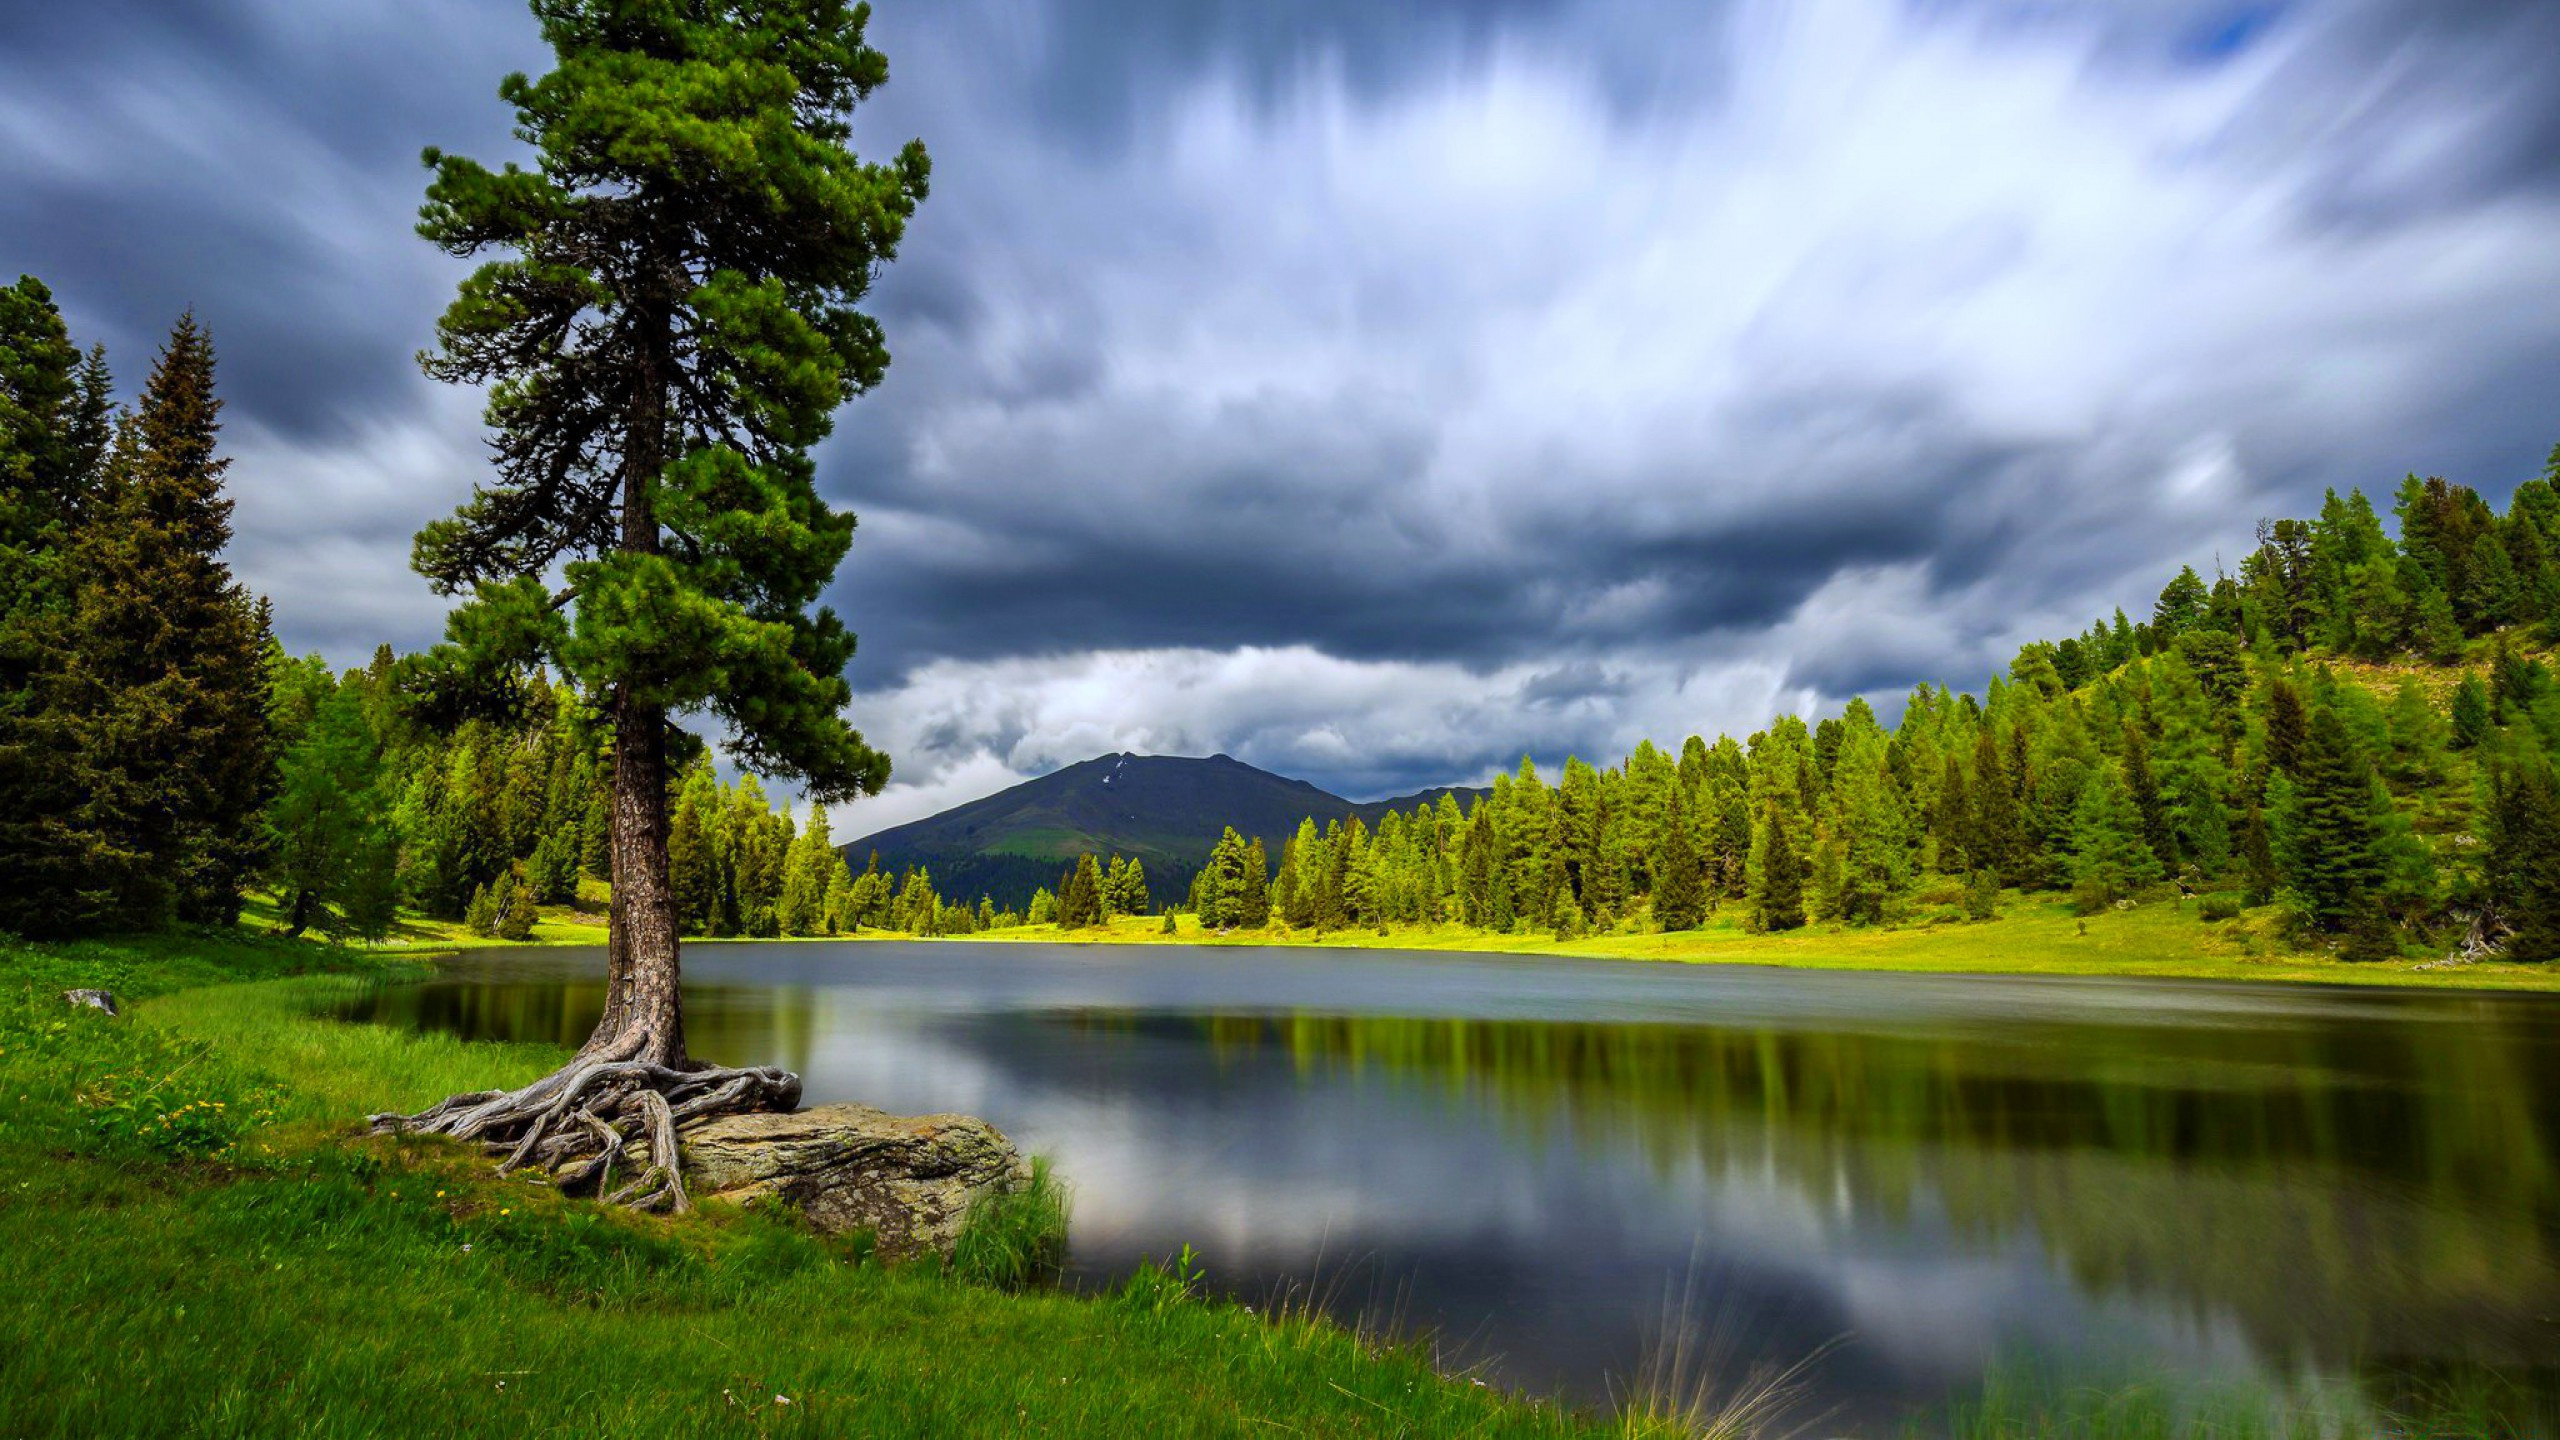 Green Tree Near Lake Under White Clouds and Blue Sky During Daytime. Wallpaper in 2560x1440 Resolution